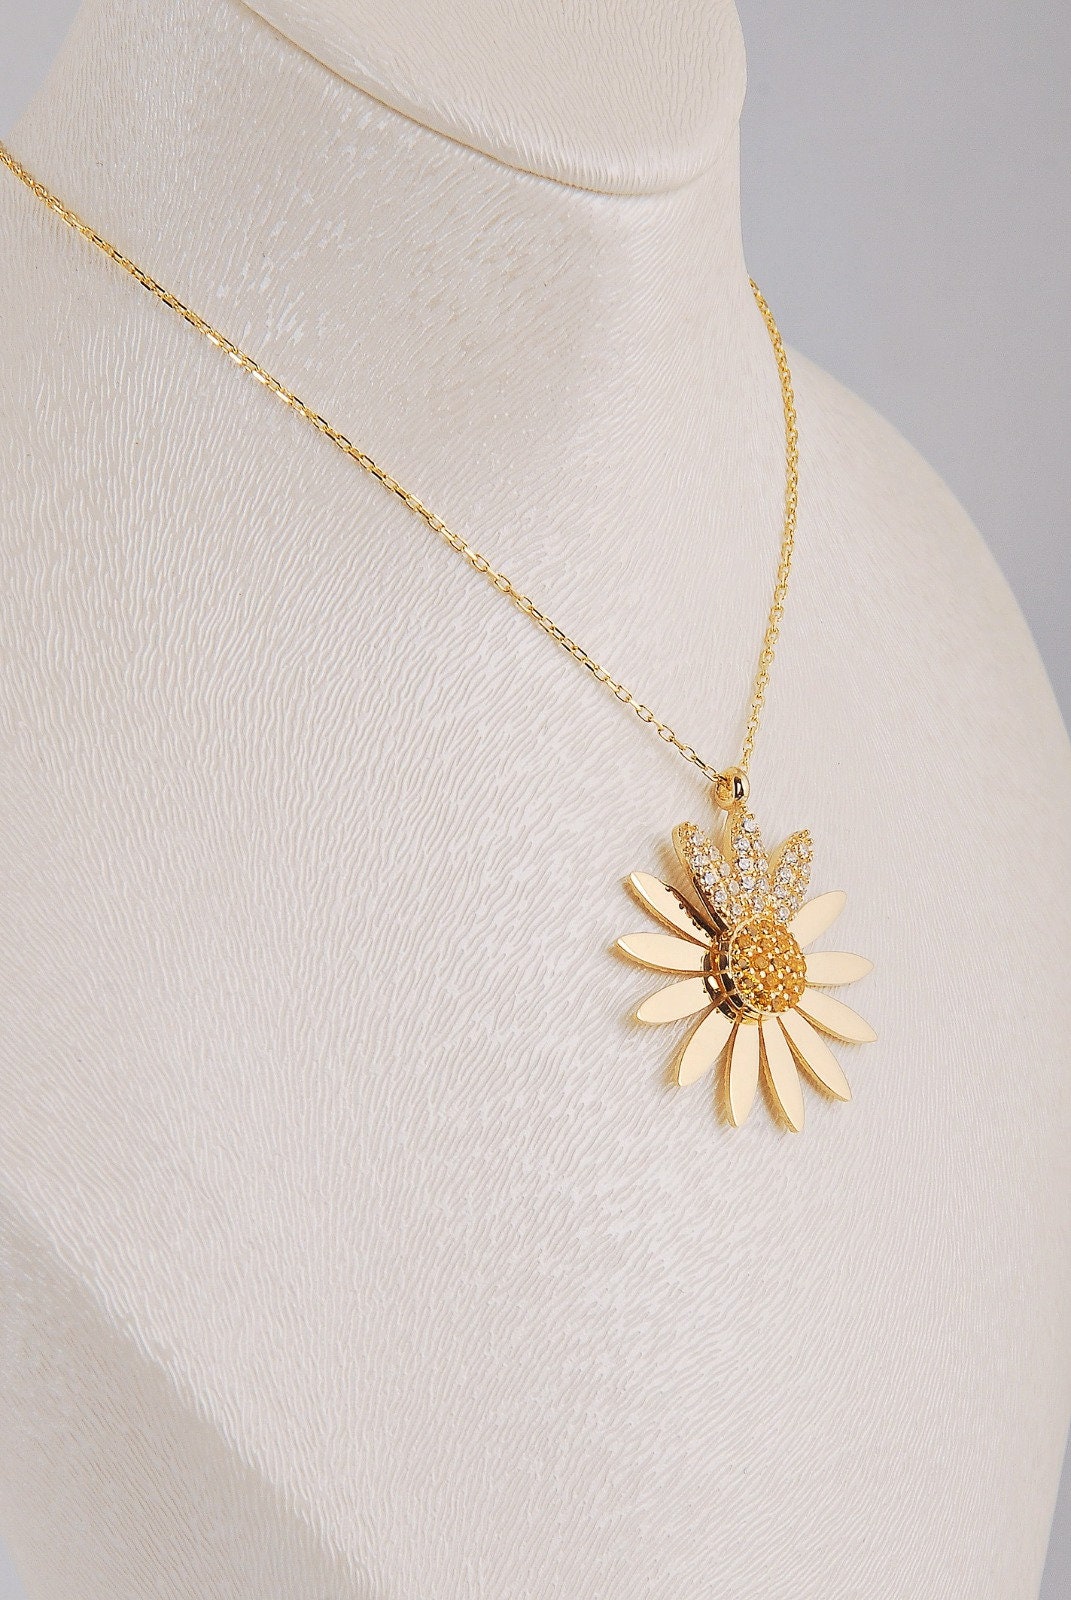 14K Solid Gold Daisy Pendant / 14K Solid Gold Flower Necklace | Etsy